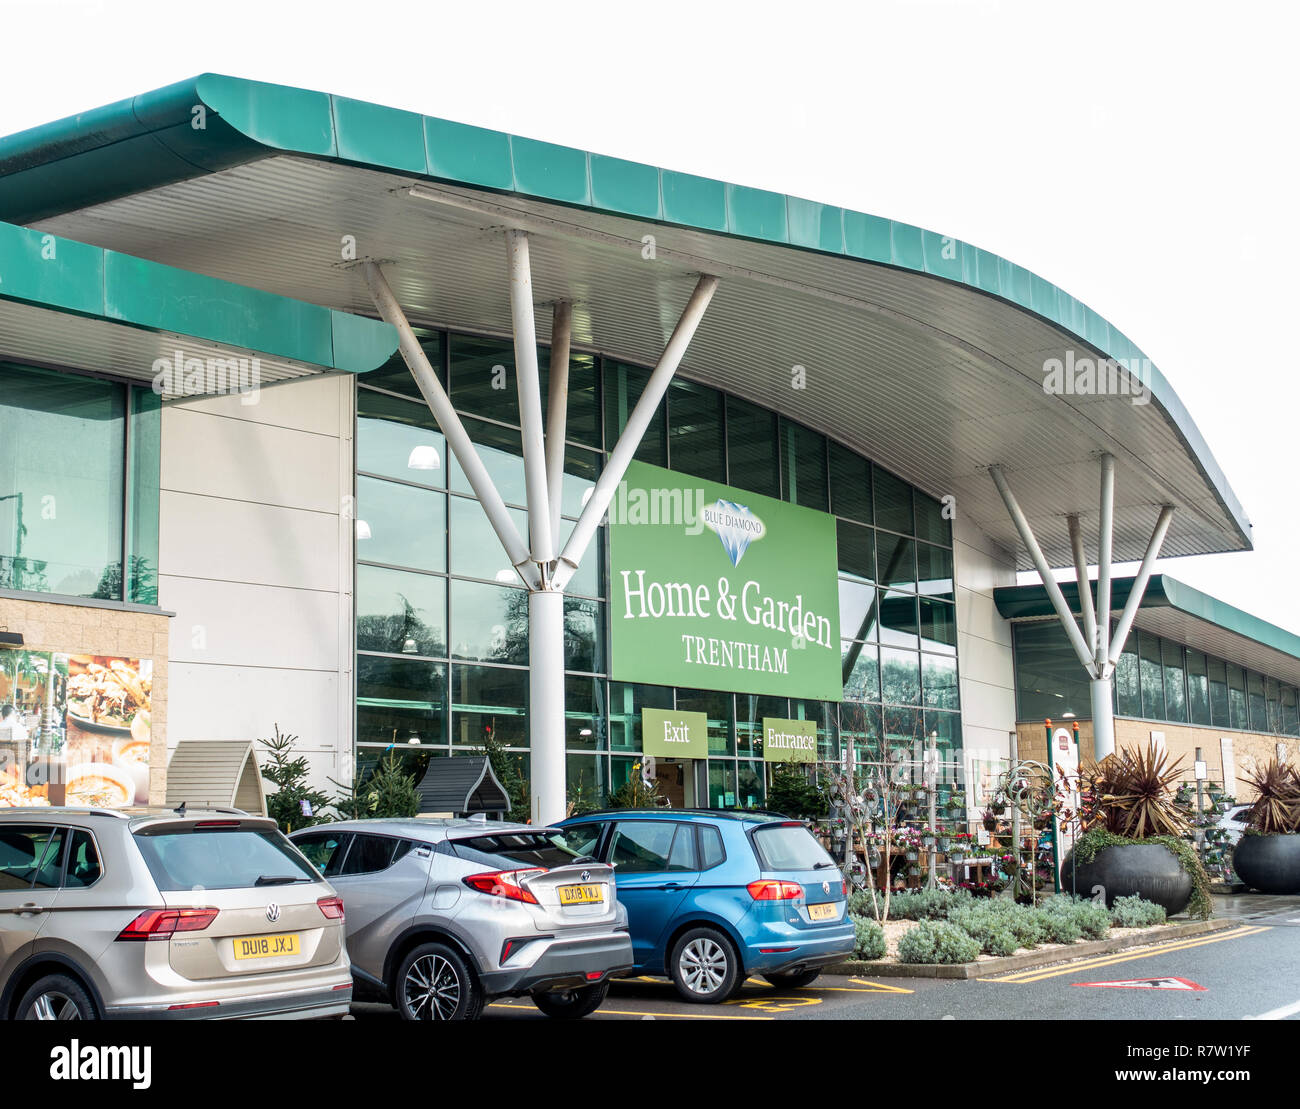 Trentham gardens main shop building and garden centre managed by St Modwens  Stock Photo - Alamy